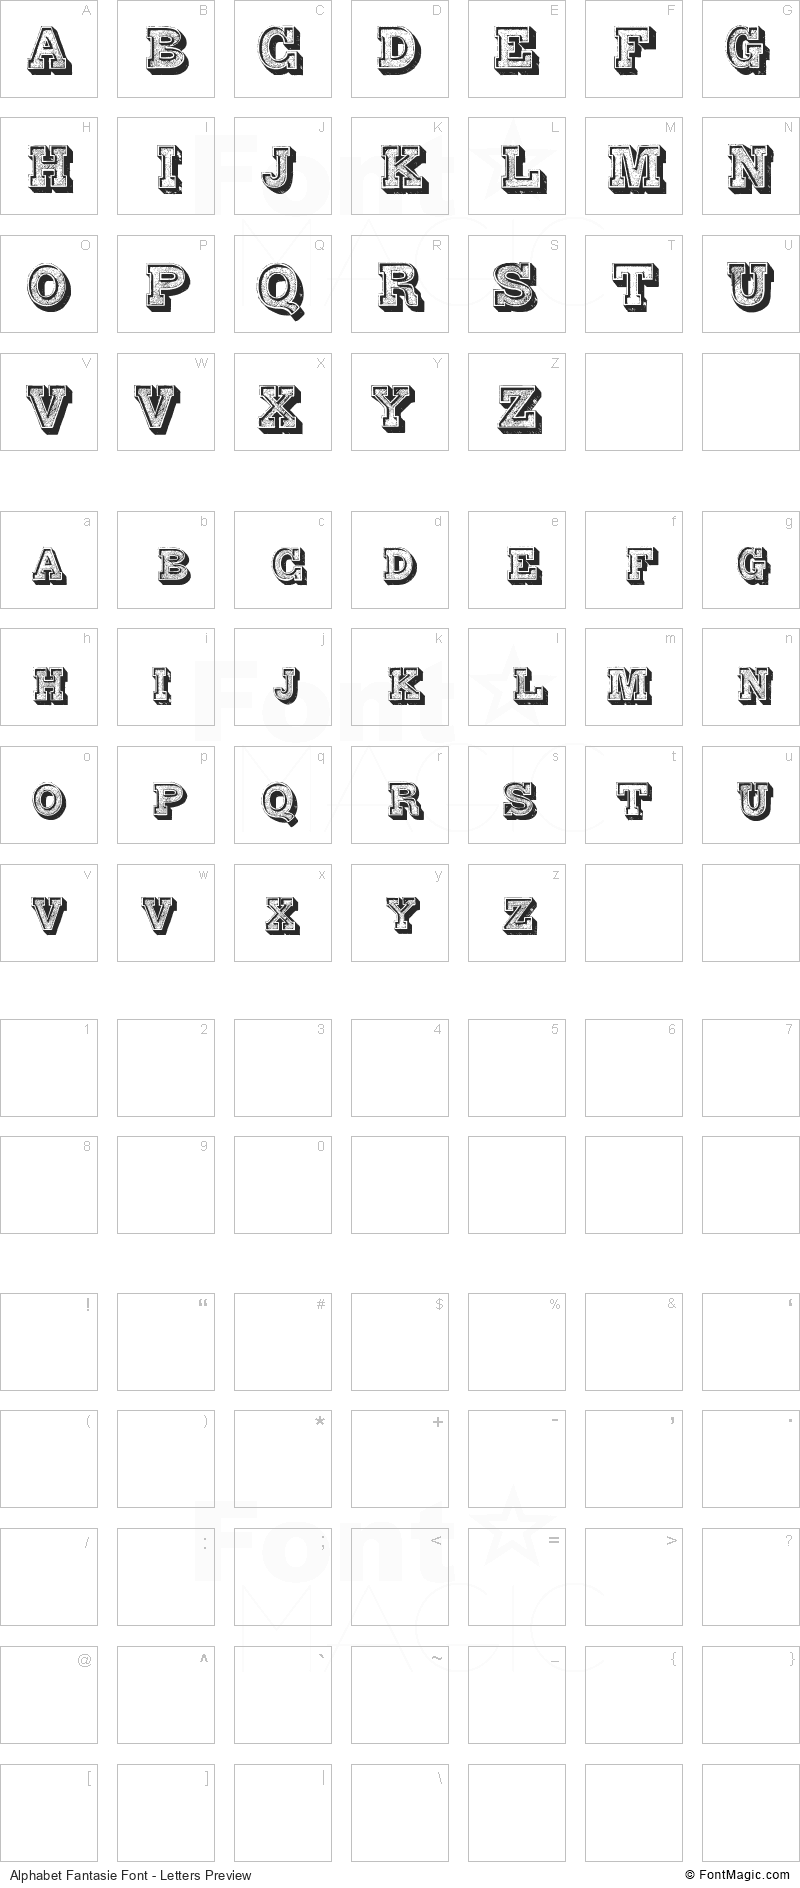 Alphabet Fantasie Font - All Latters Preview Chart